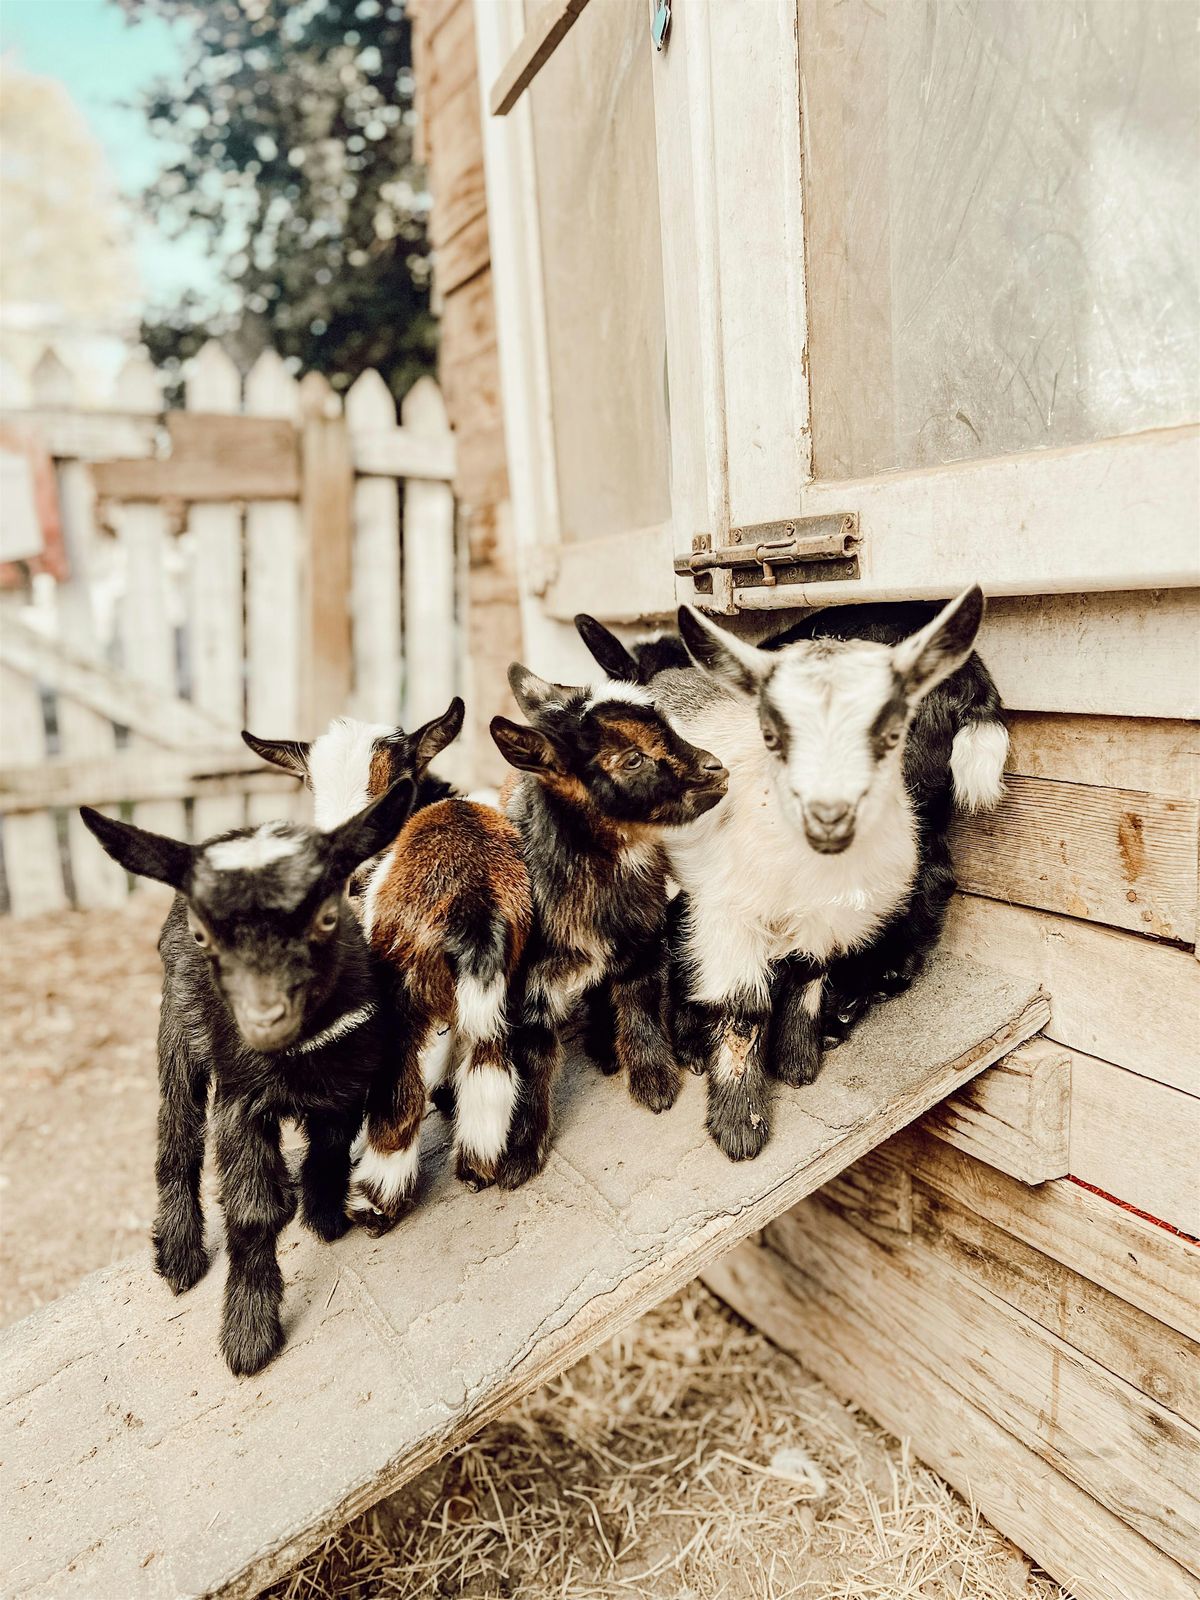 Intro Class to Goats & Chickens at Flowertown Charm Farm